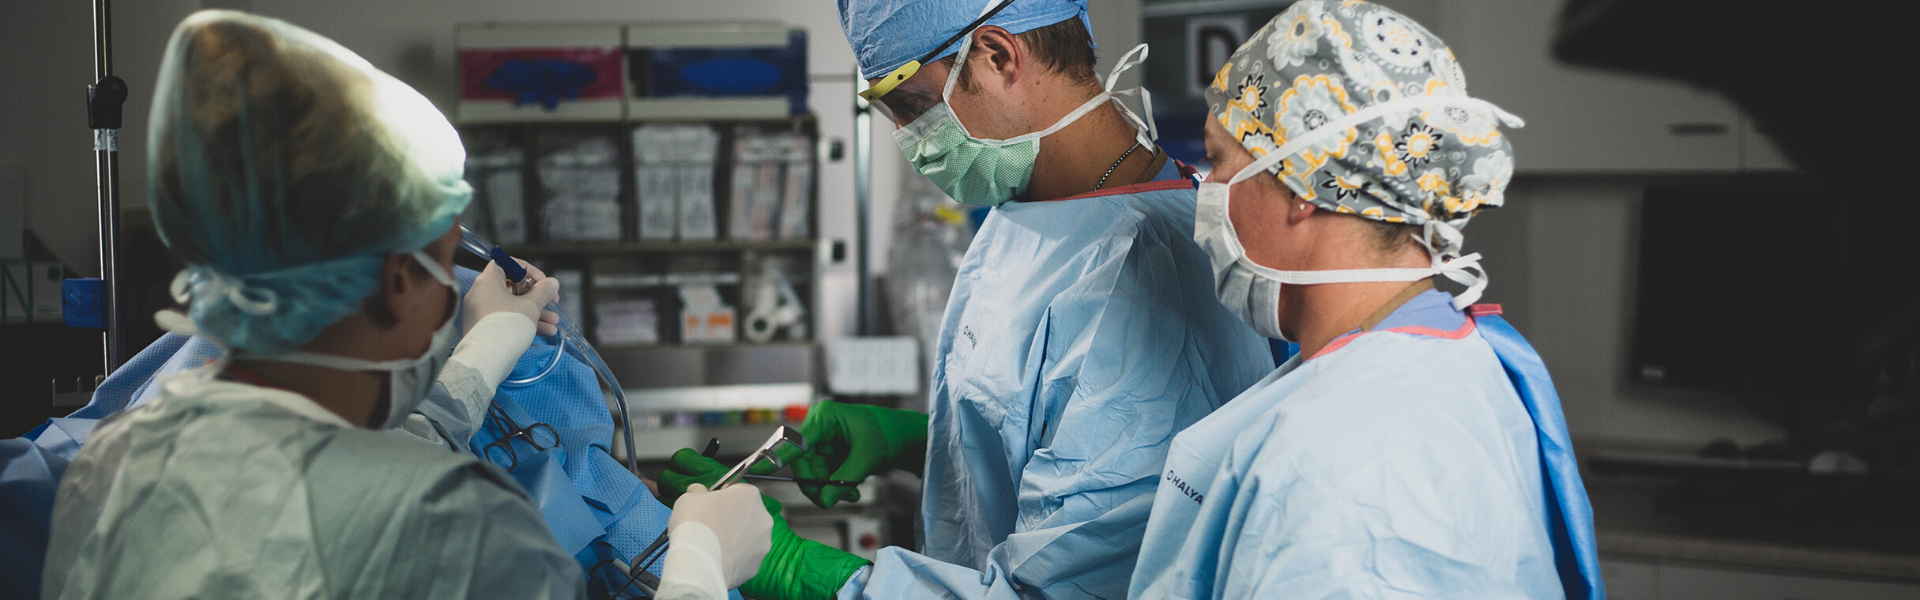 An orthopedic surgeon performing a joint replacement surgery.